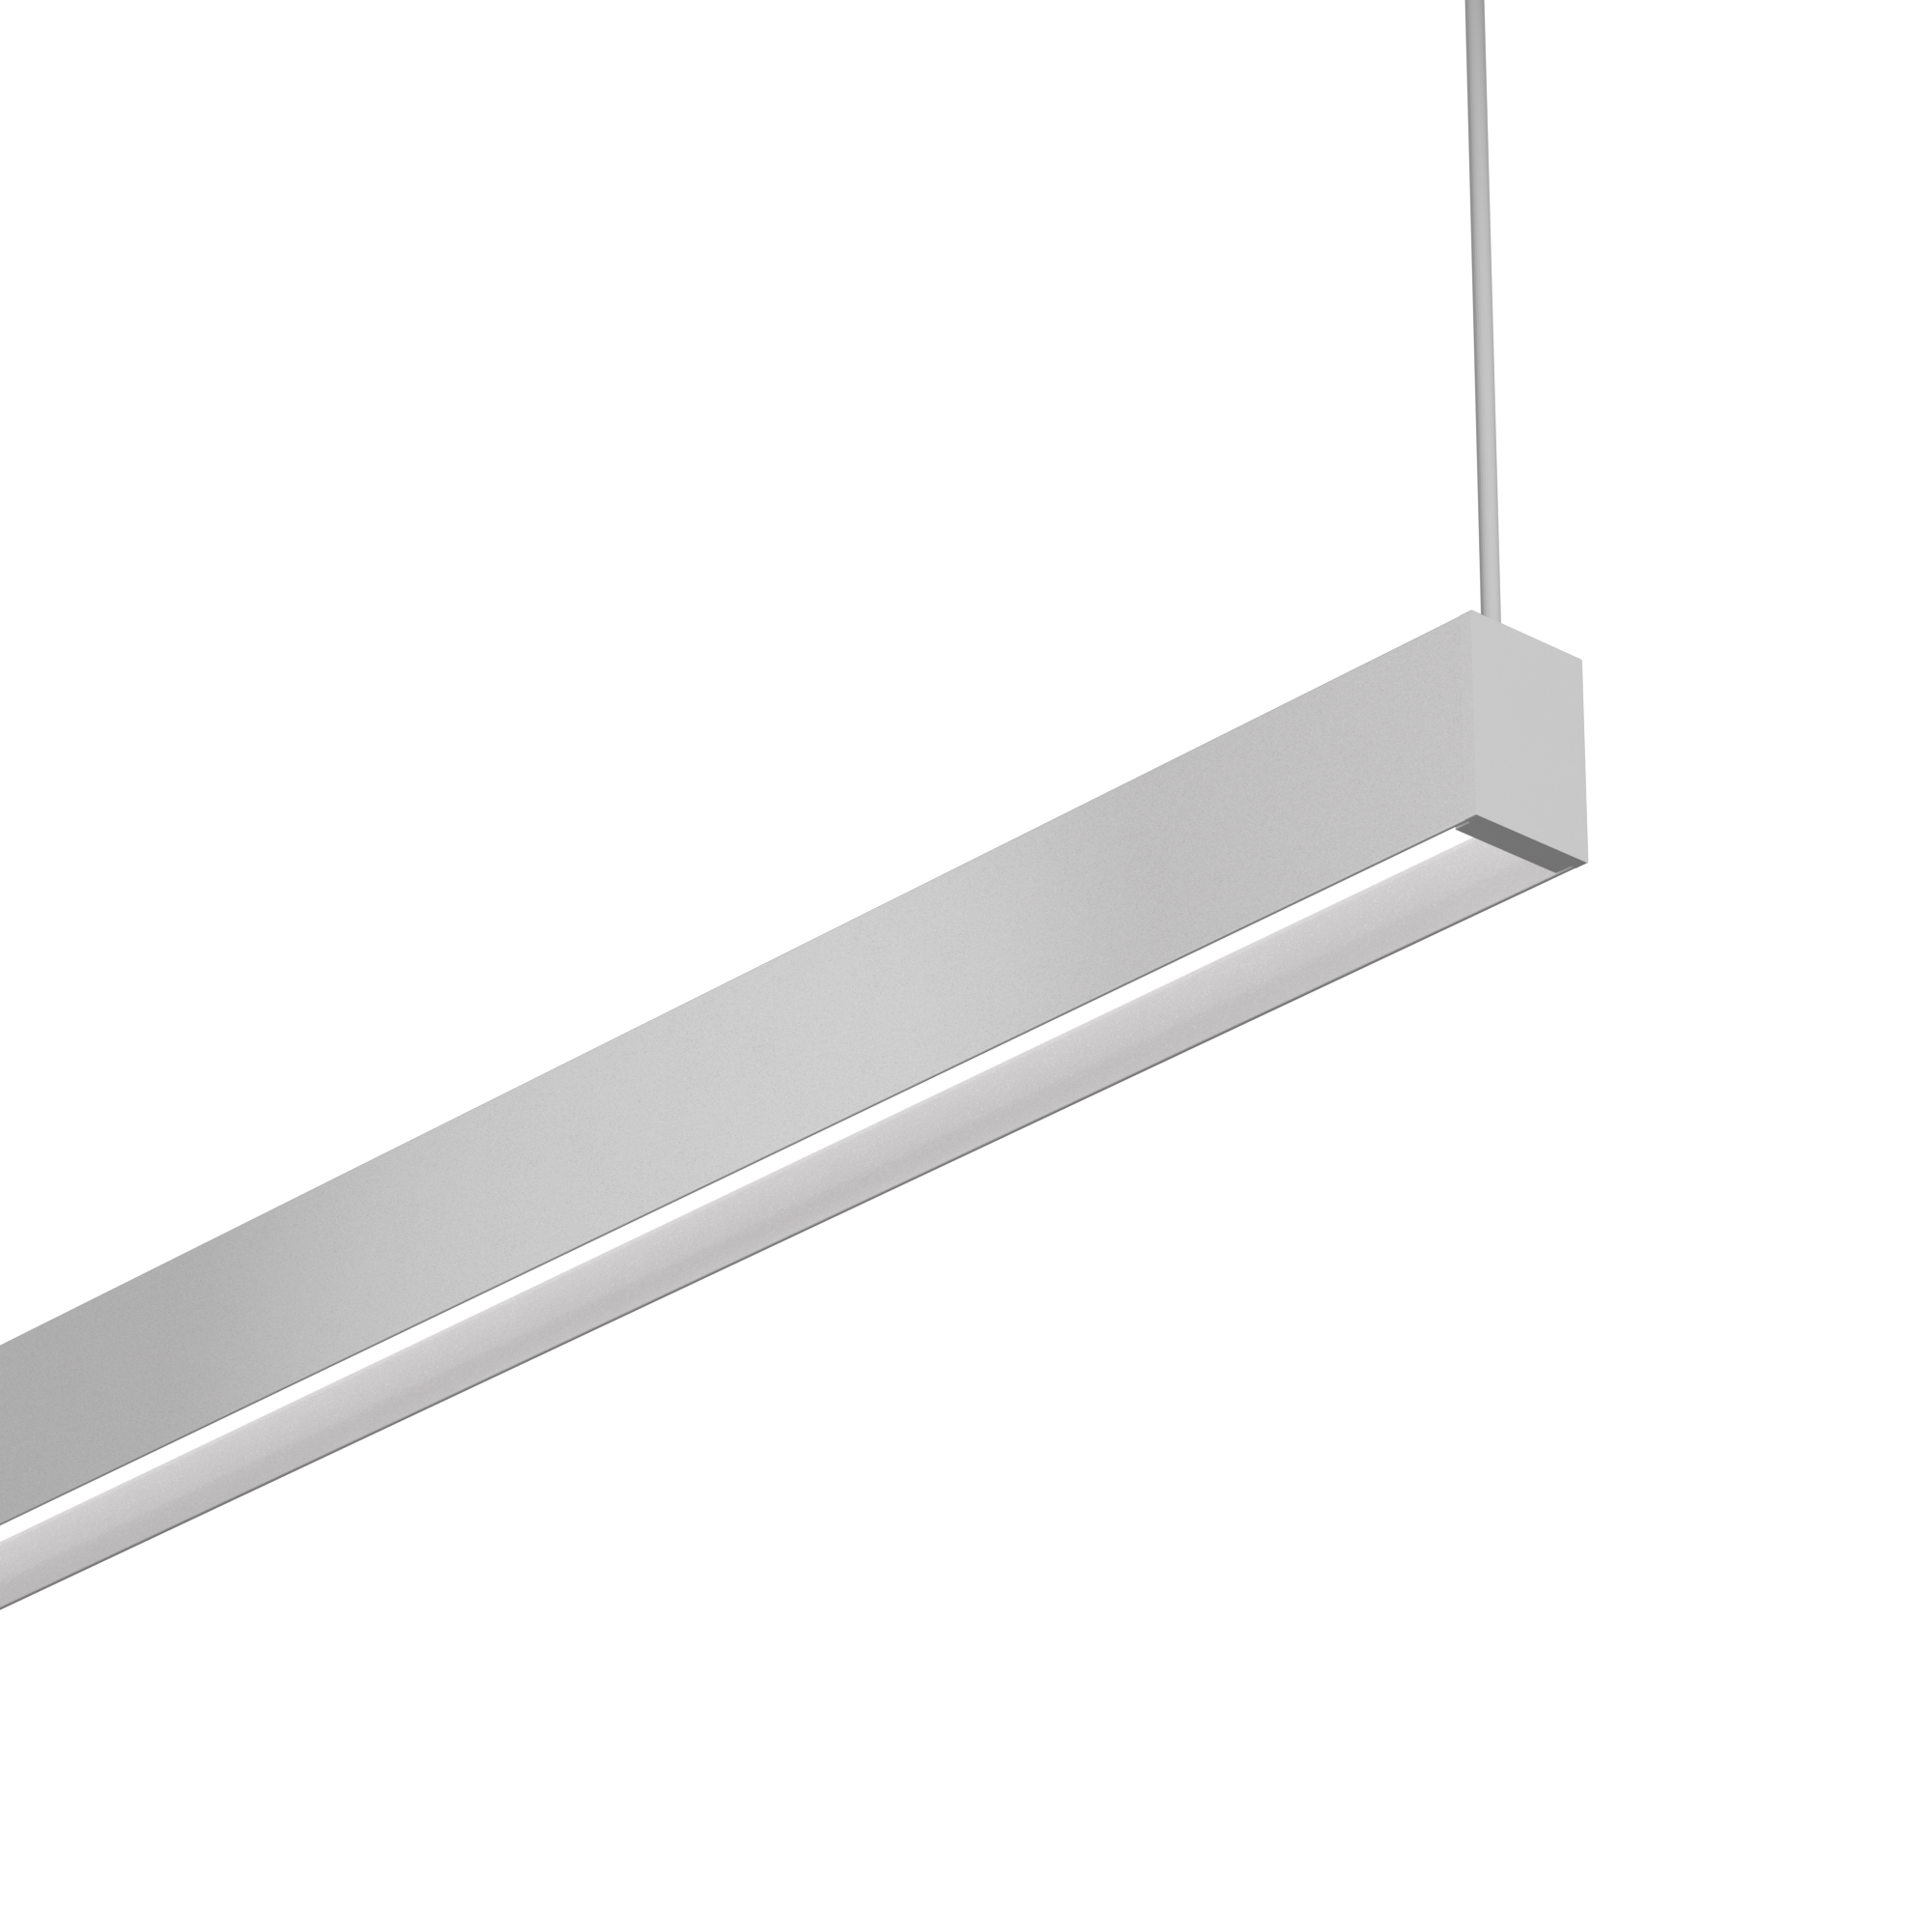 0.95” Ultra-Compact LED Linear
NANOBeam is 0.95” wide, bringing regressed SmartBeam® capabilities to a low-glare form that compliments architectural space. NANOBeam features a remote driver to remove visual bulk.

 

Beam profile: 0.95” (24mm) x 1.38” (35mm)